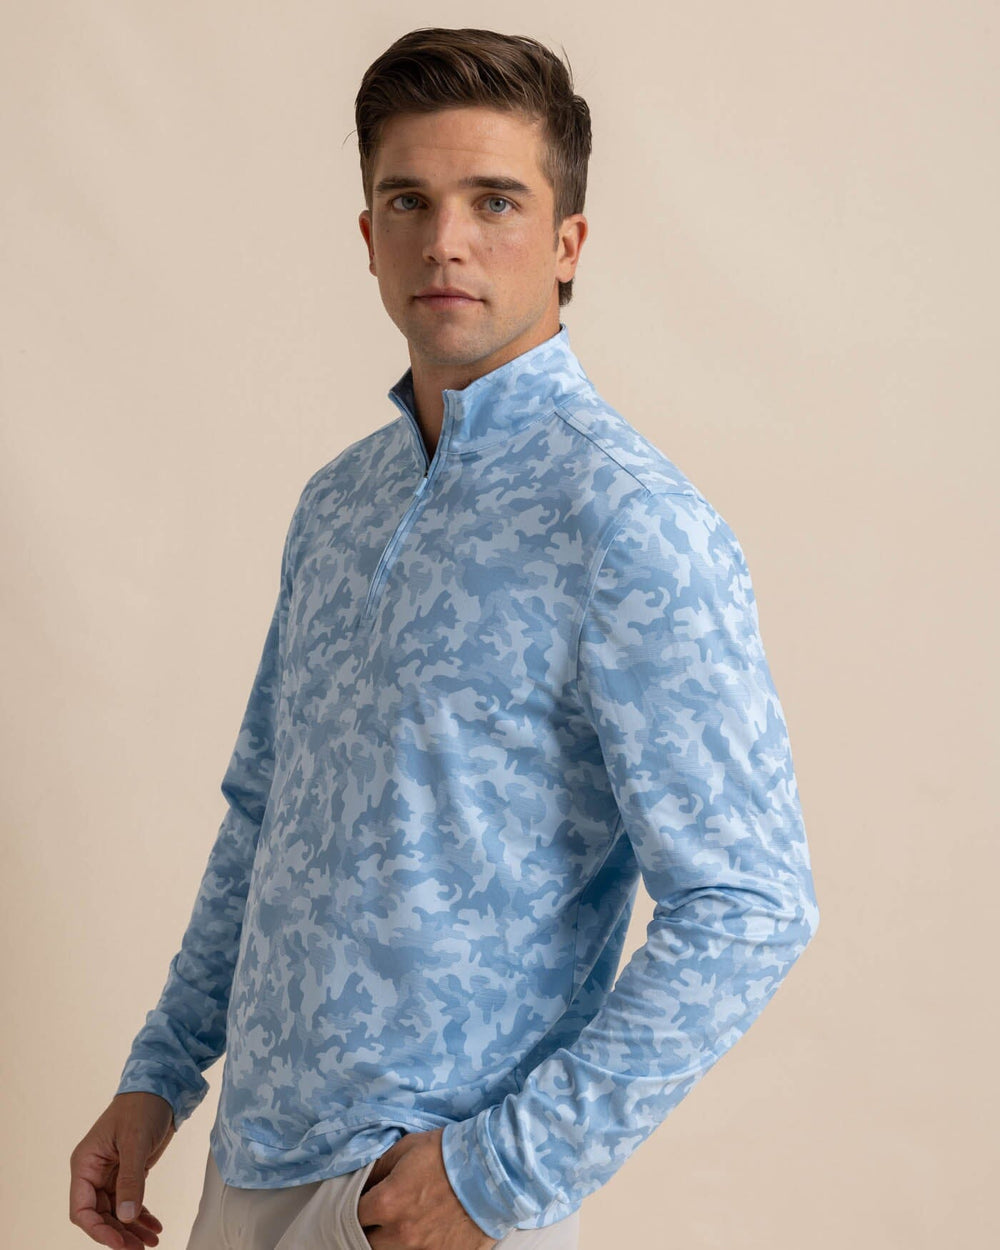 The front view of the Southern Tide Island Camo Print Cruiser Quarter Zip by Southern Tide - Clearwater Blue